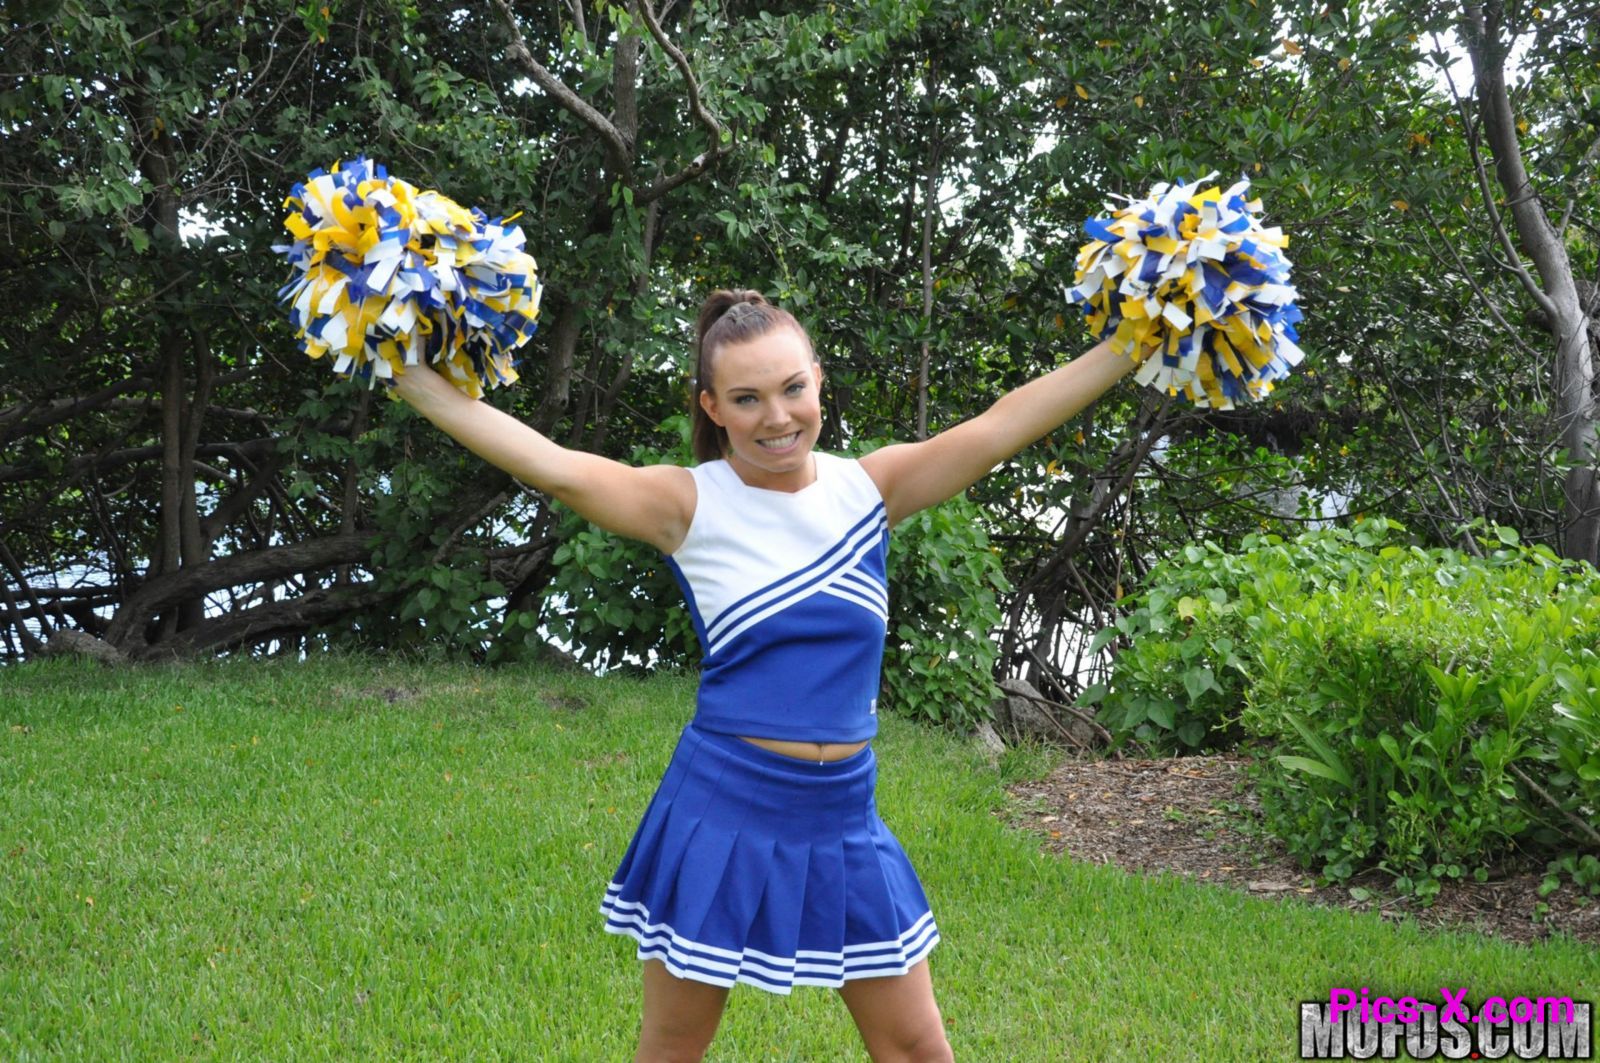 Cheerleader Teen Home Video - I Know That Girl - Image 1